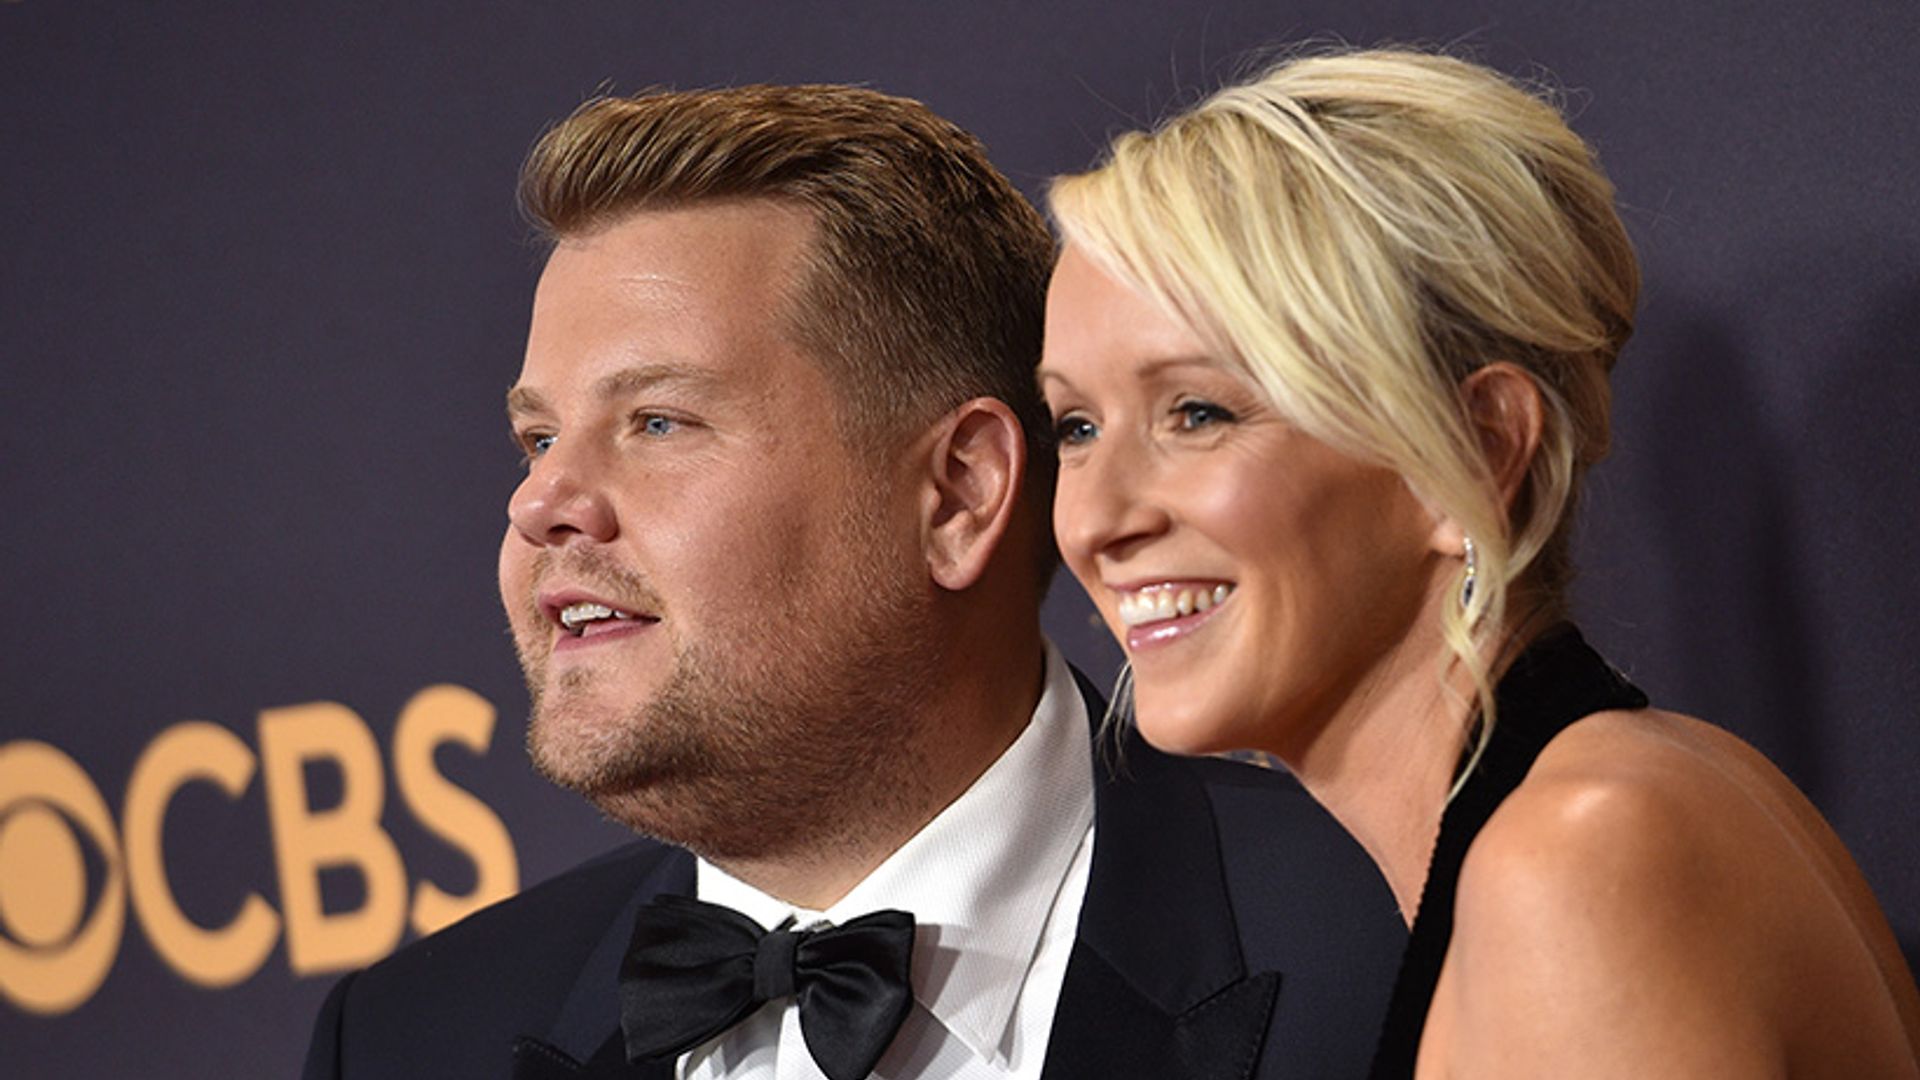 James Corden and wife Julia Carey reveal baby's gender – find out here!